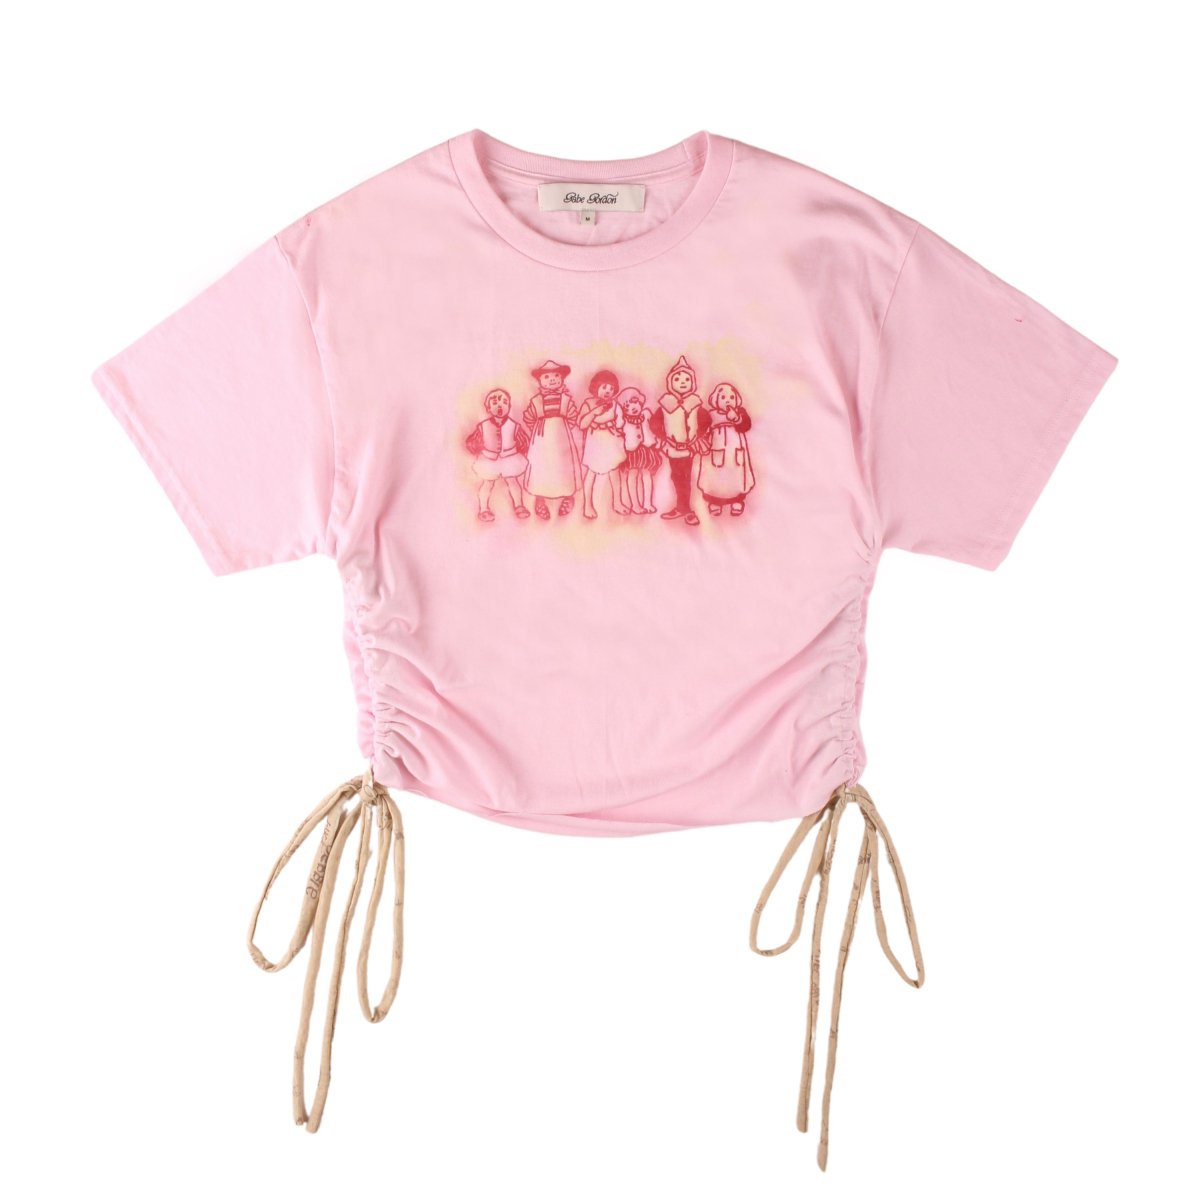 ALL THE KIDS T-SHIRTLIGHT PINK